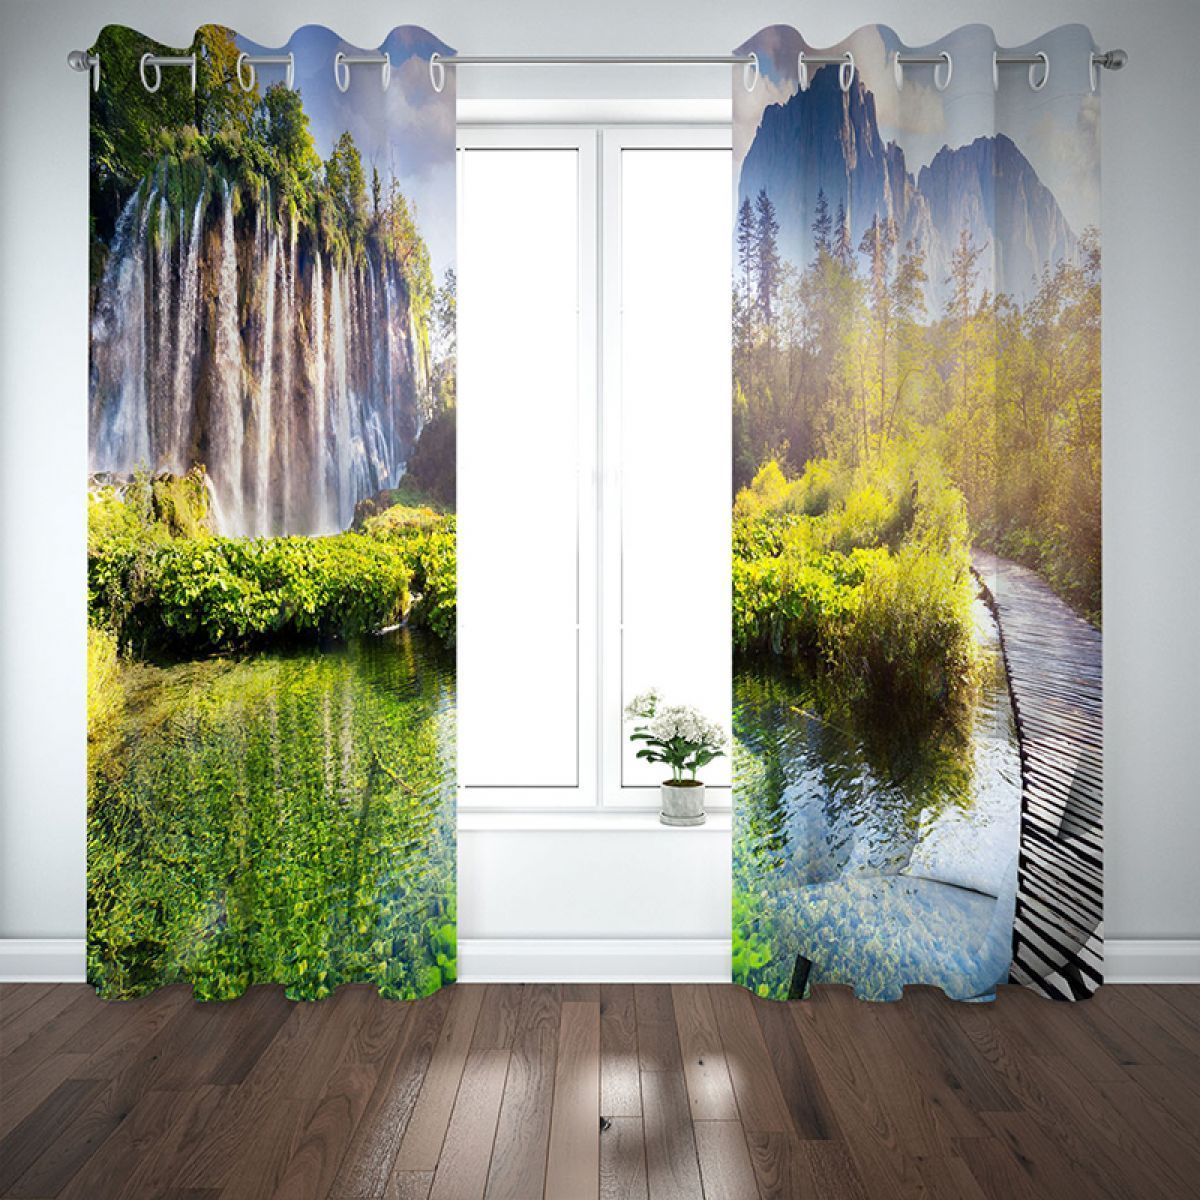 3d mountain and waterfall scenery printed window curtain home decor 4886